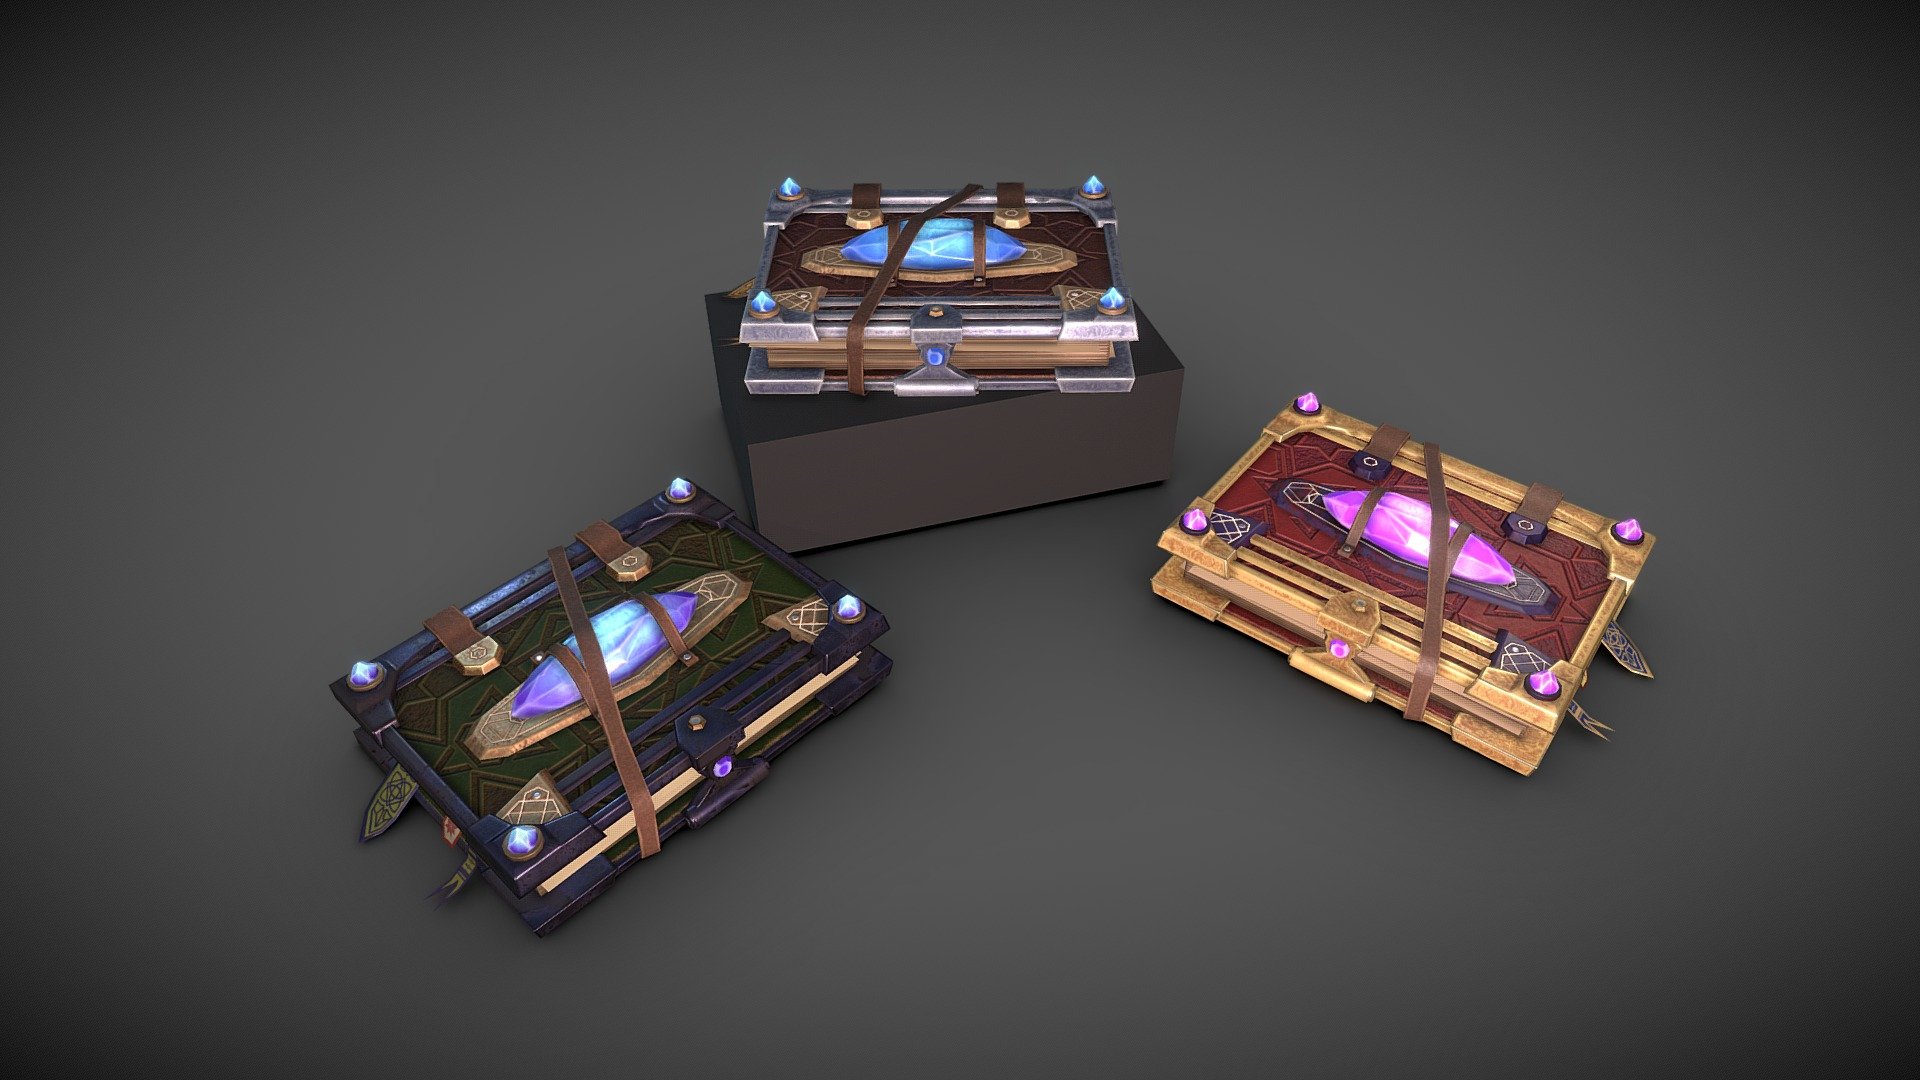 Magic Books lowpoly models

Three different texture sets

Game-ready models
2K PBR Textures

The UVs are tightly optimized

Contains Maya .mb, .fbx and .obj files

All scene is here https://sketchfab.com/3d-models/magical-summon-table-5119faf061da4ddab9ada17ebd0f9468 - Magic Books - 3D model by Rixael 3d model